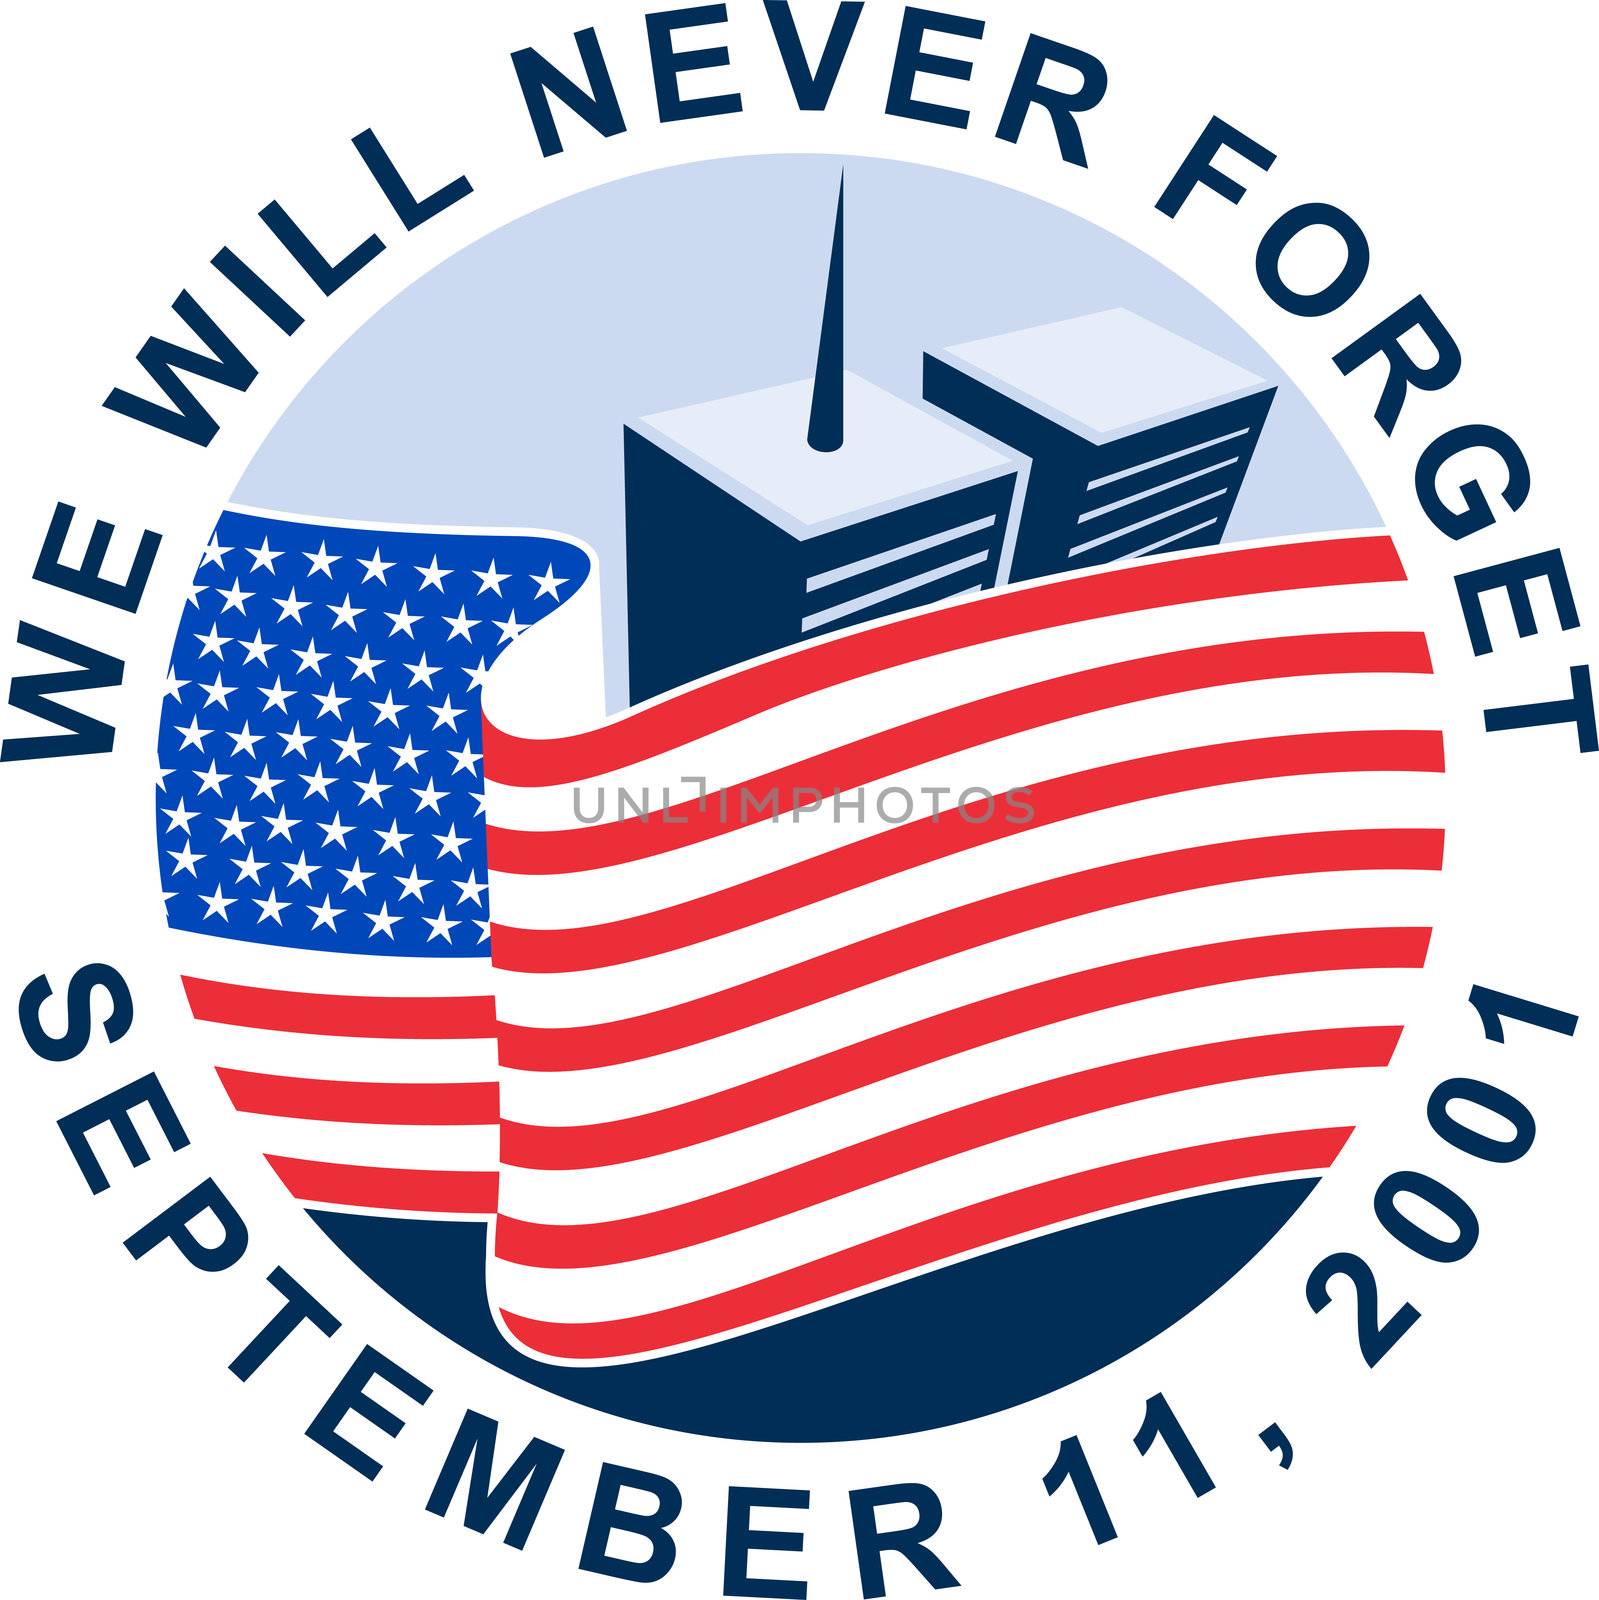 illustration of am unfurled american flag  with world trade center twin tower building in the 
background.